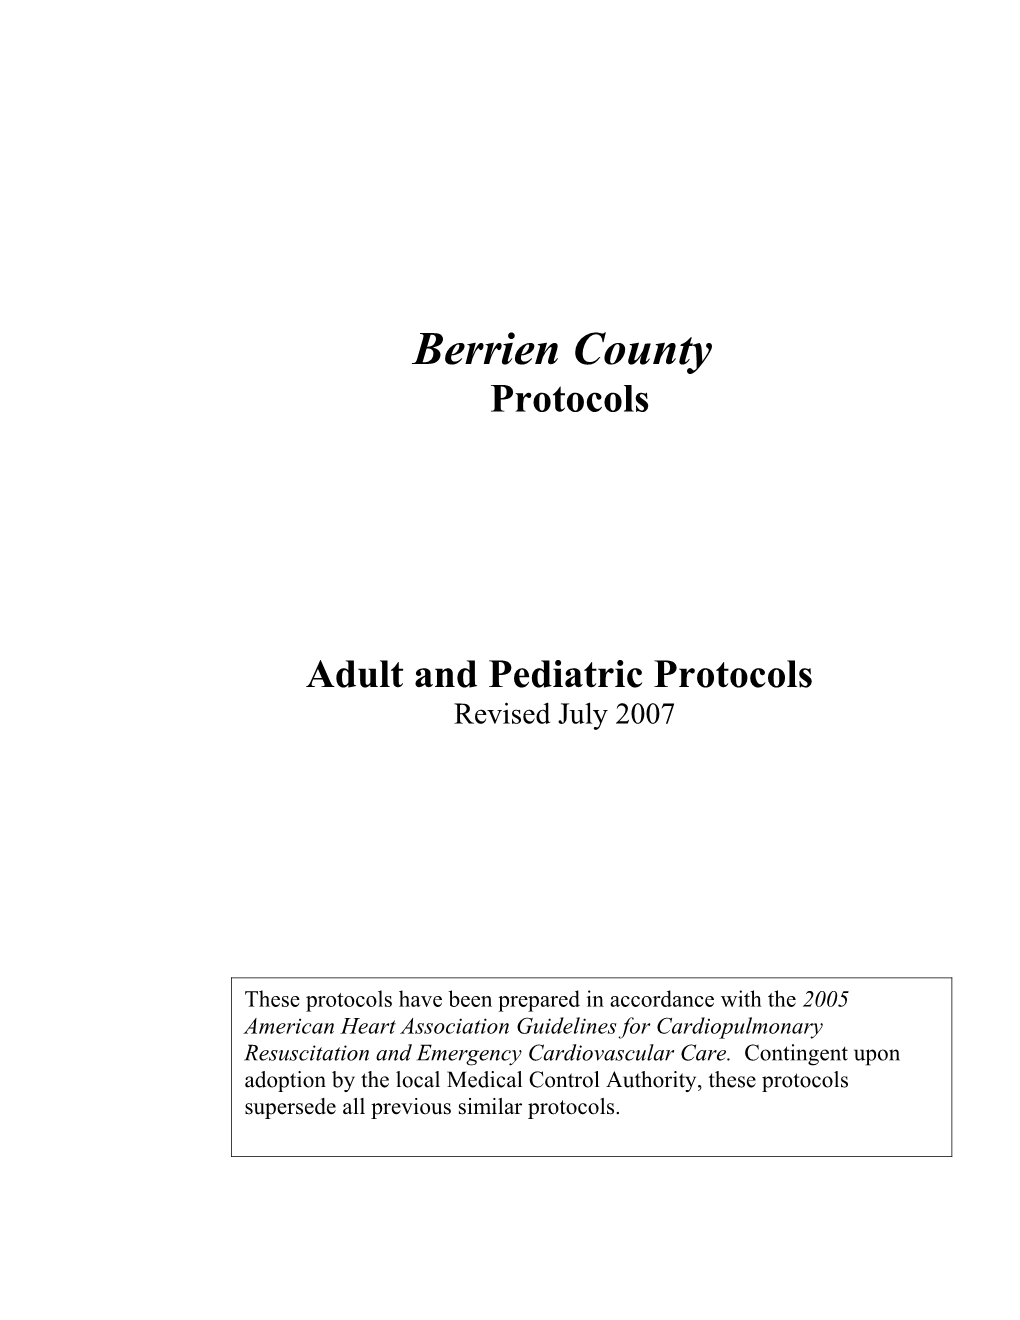 Berrien County Medical Control Authority